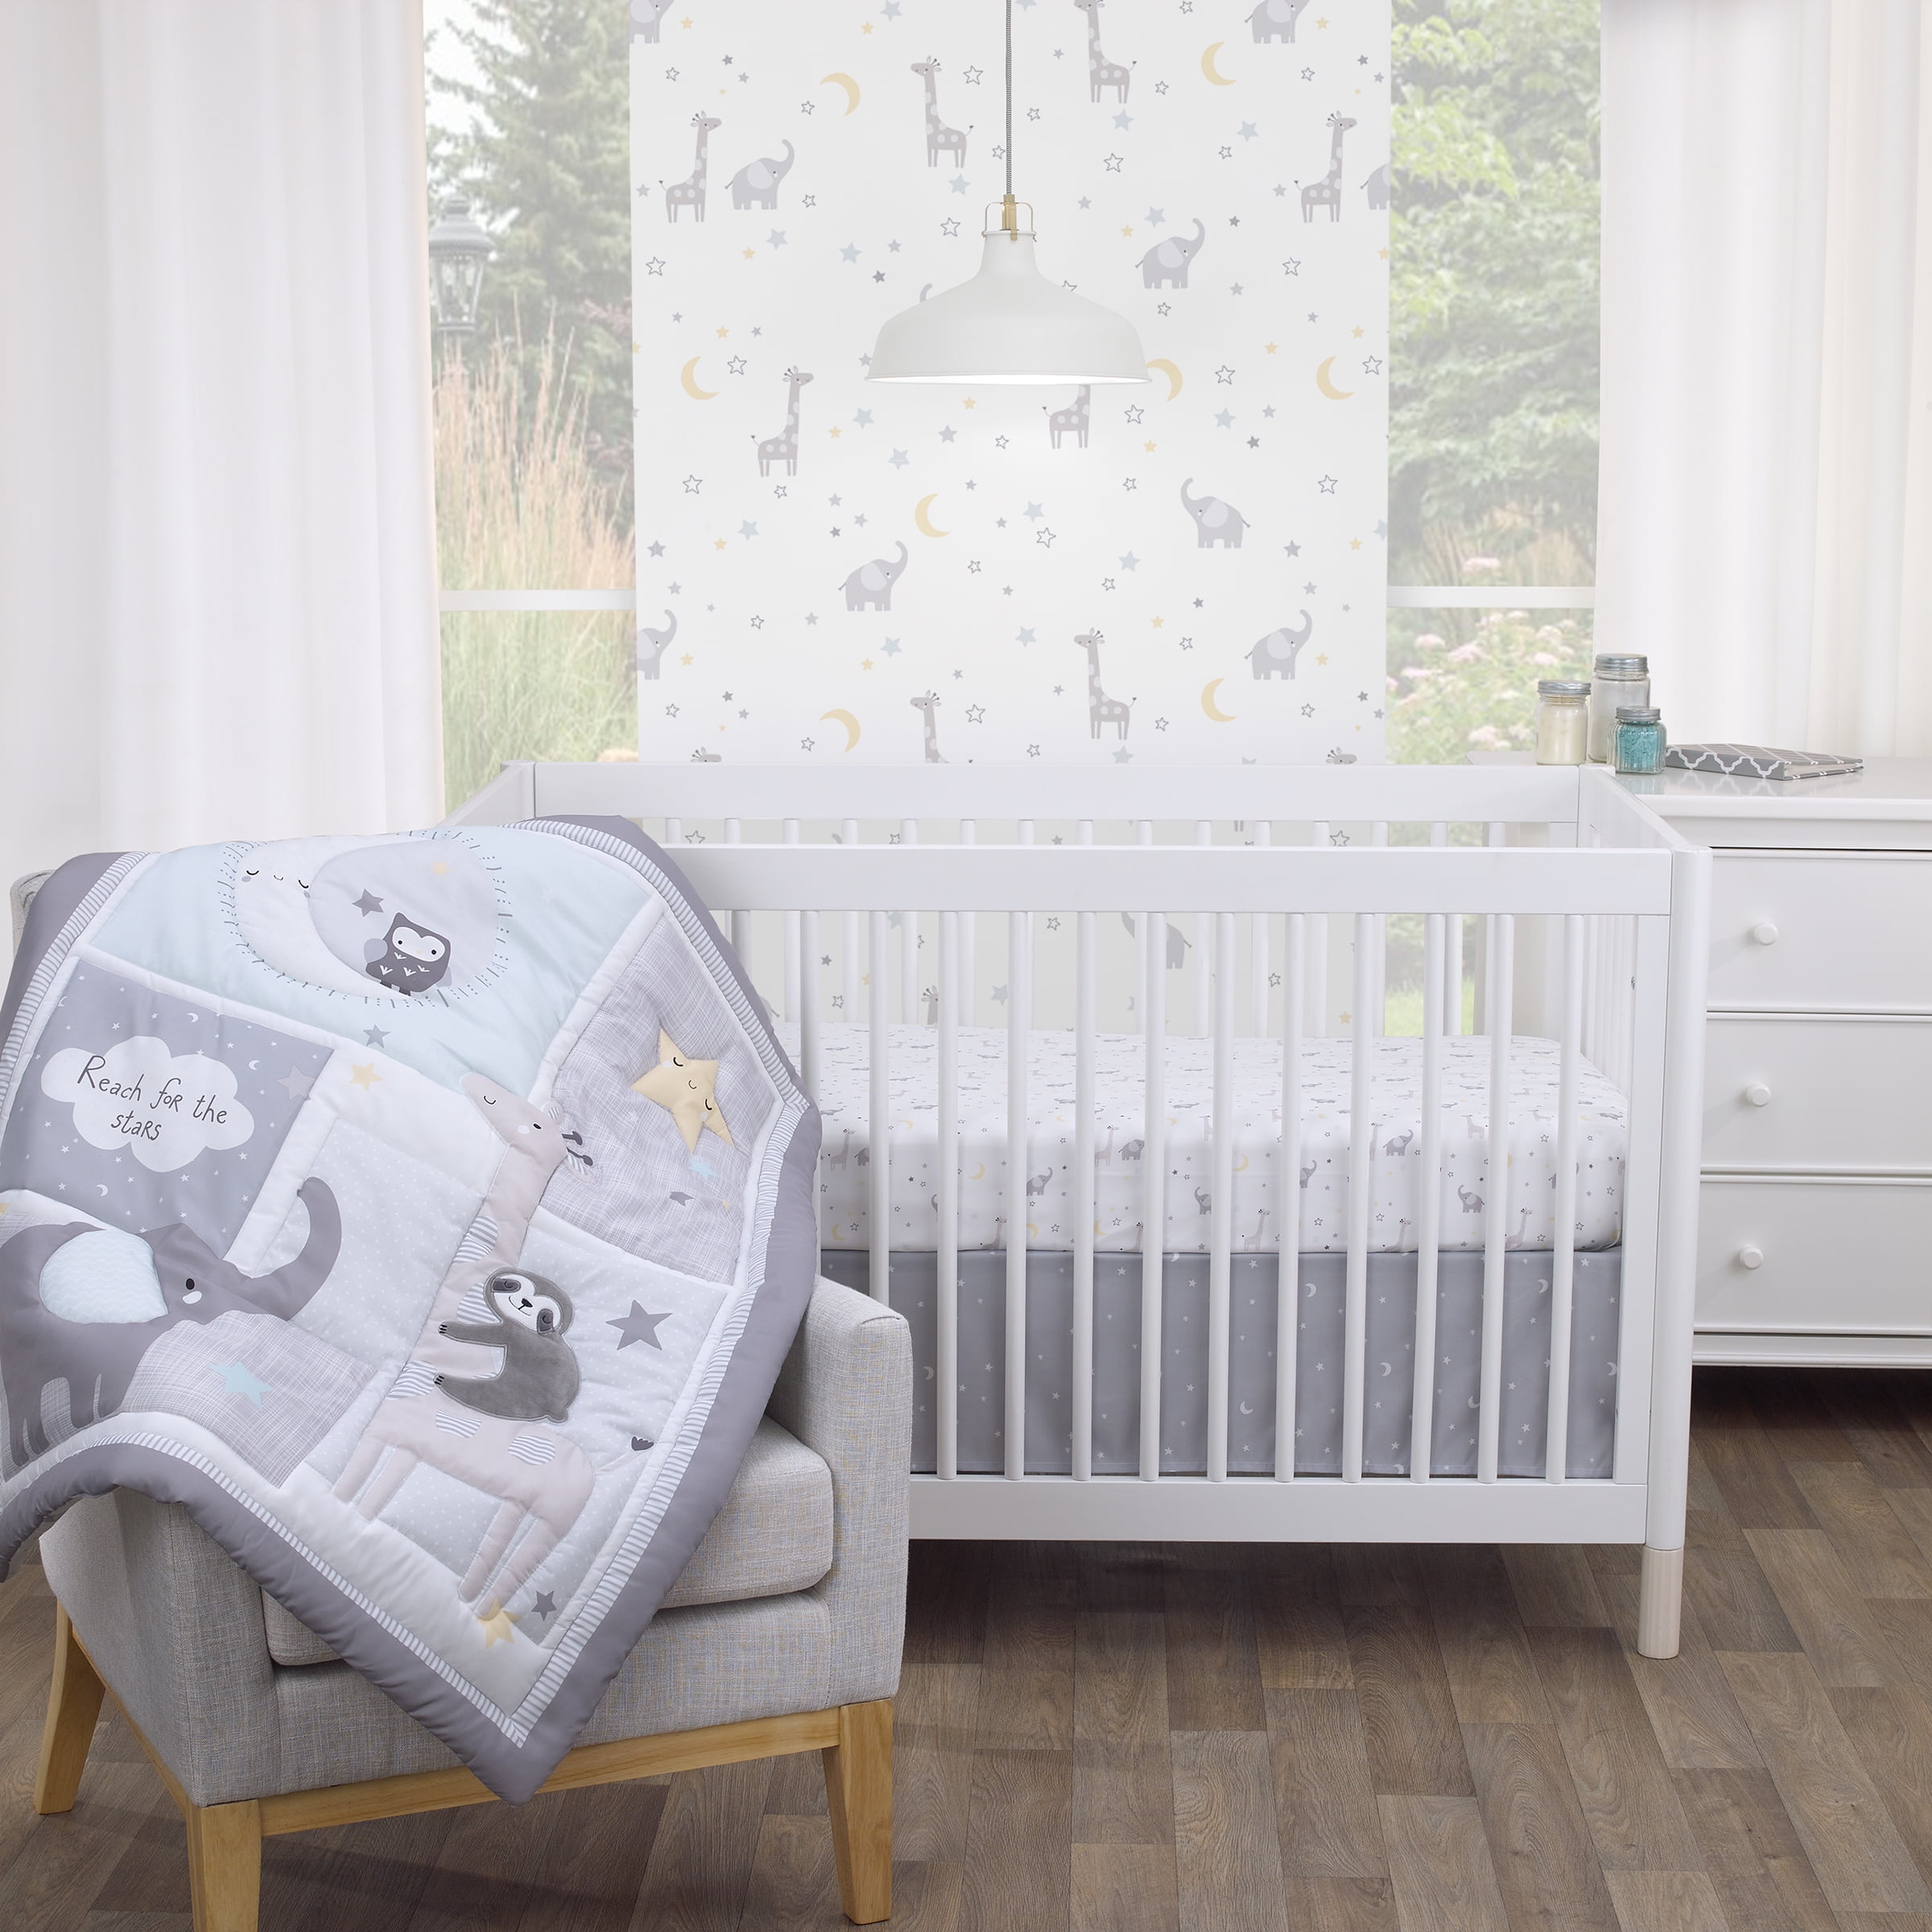 TEDDY MOON BABY BOY /BABY GIRL BEDDING SET COT or COT BED SIZE+MORE DESIGNS 